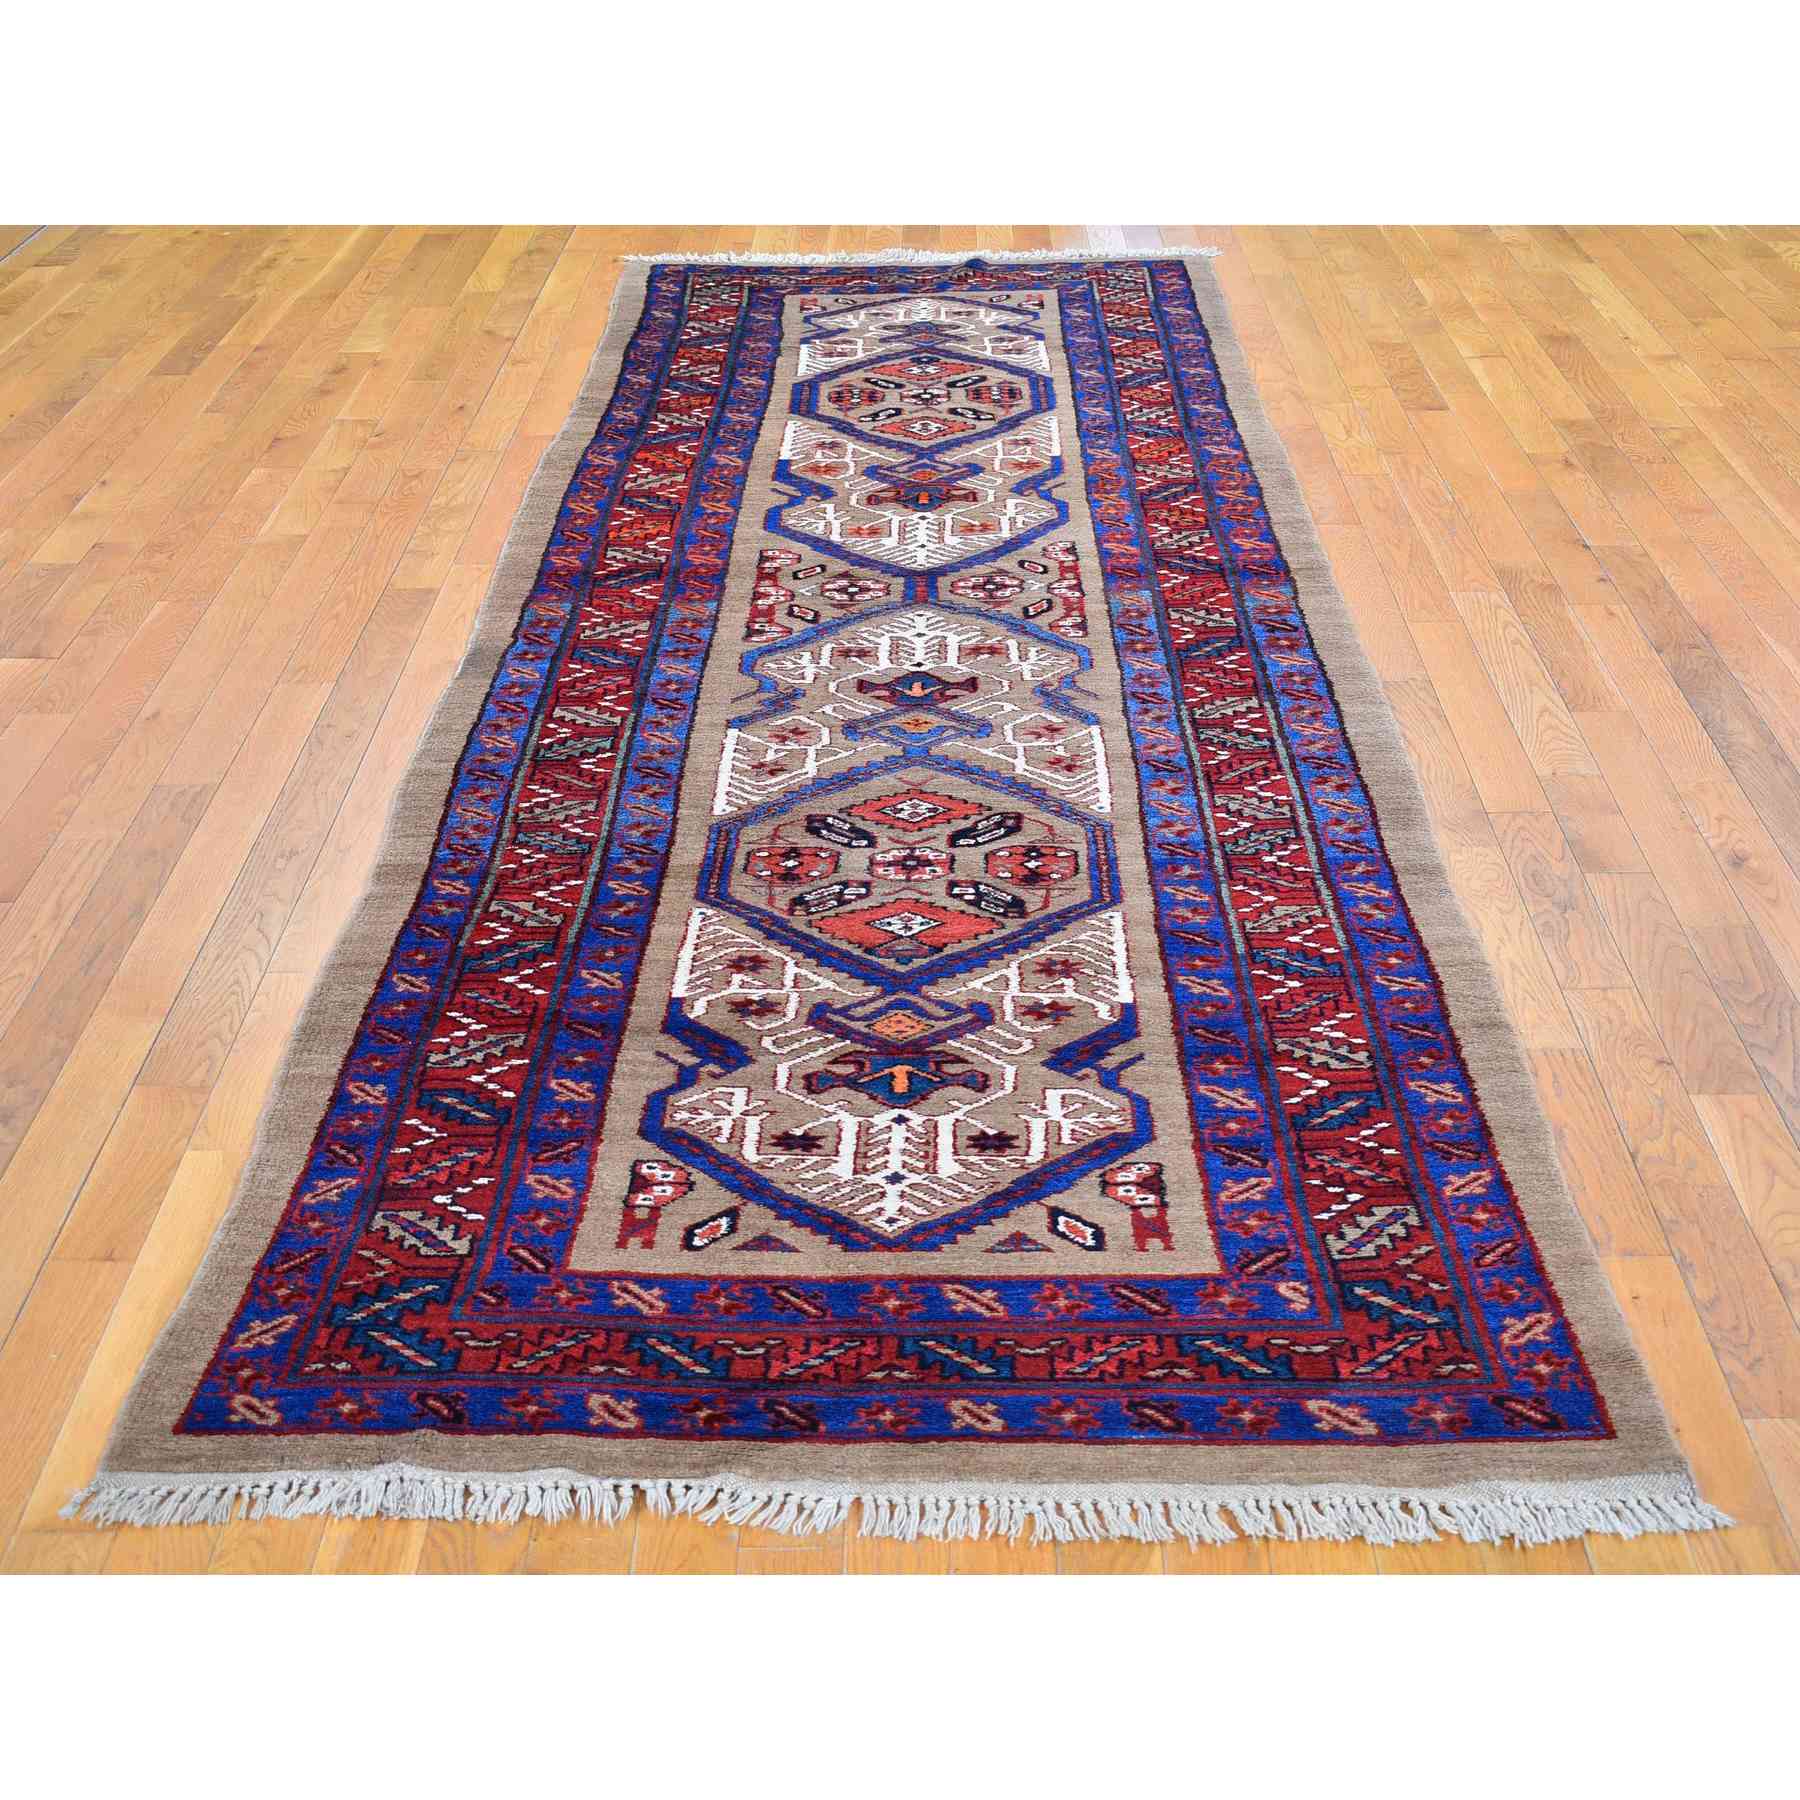 Antique-Hand-Knotted-Rug-332985